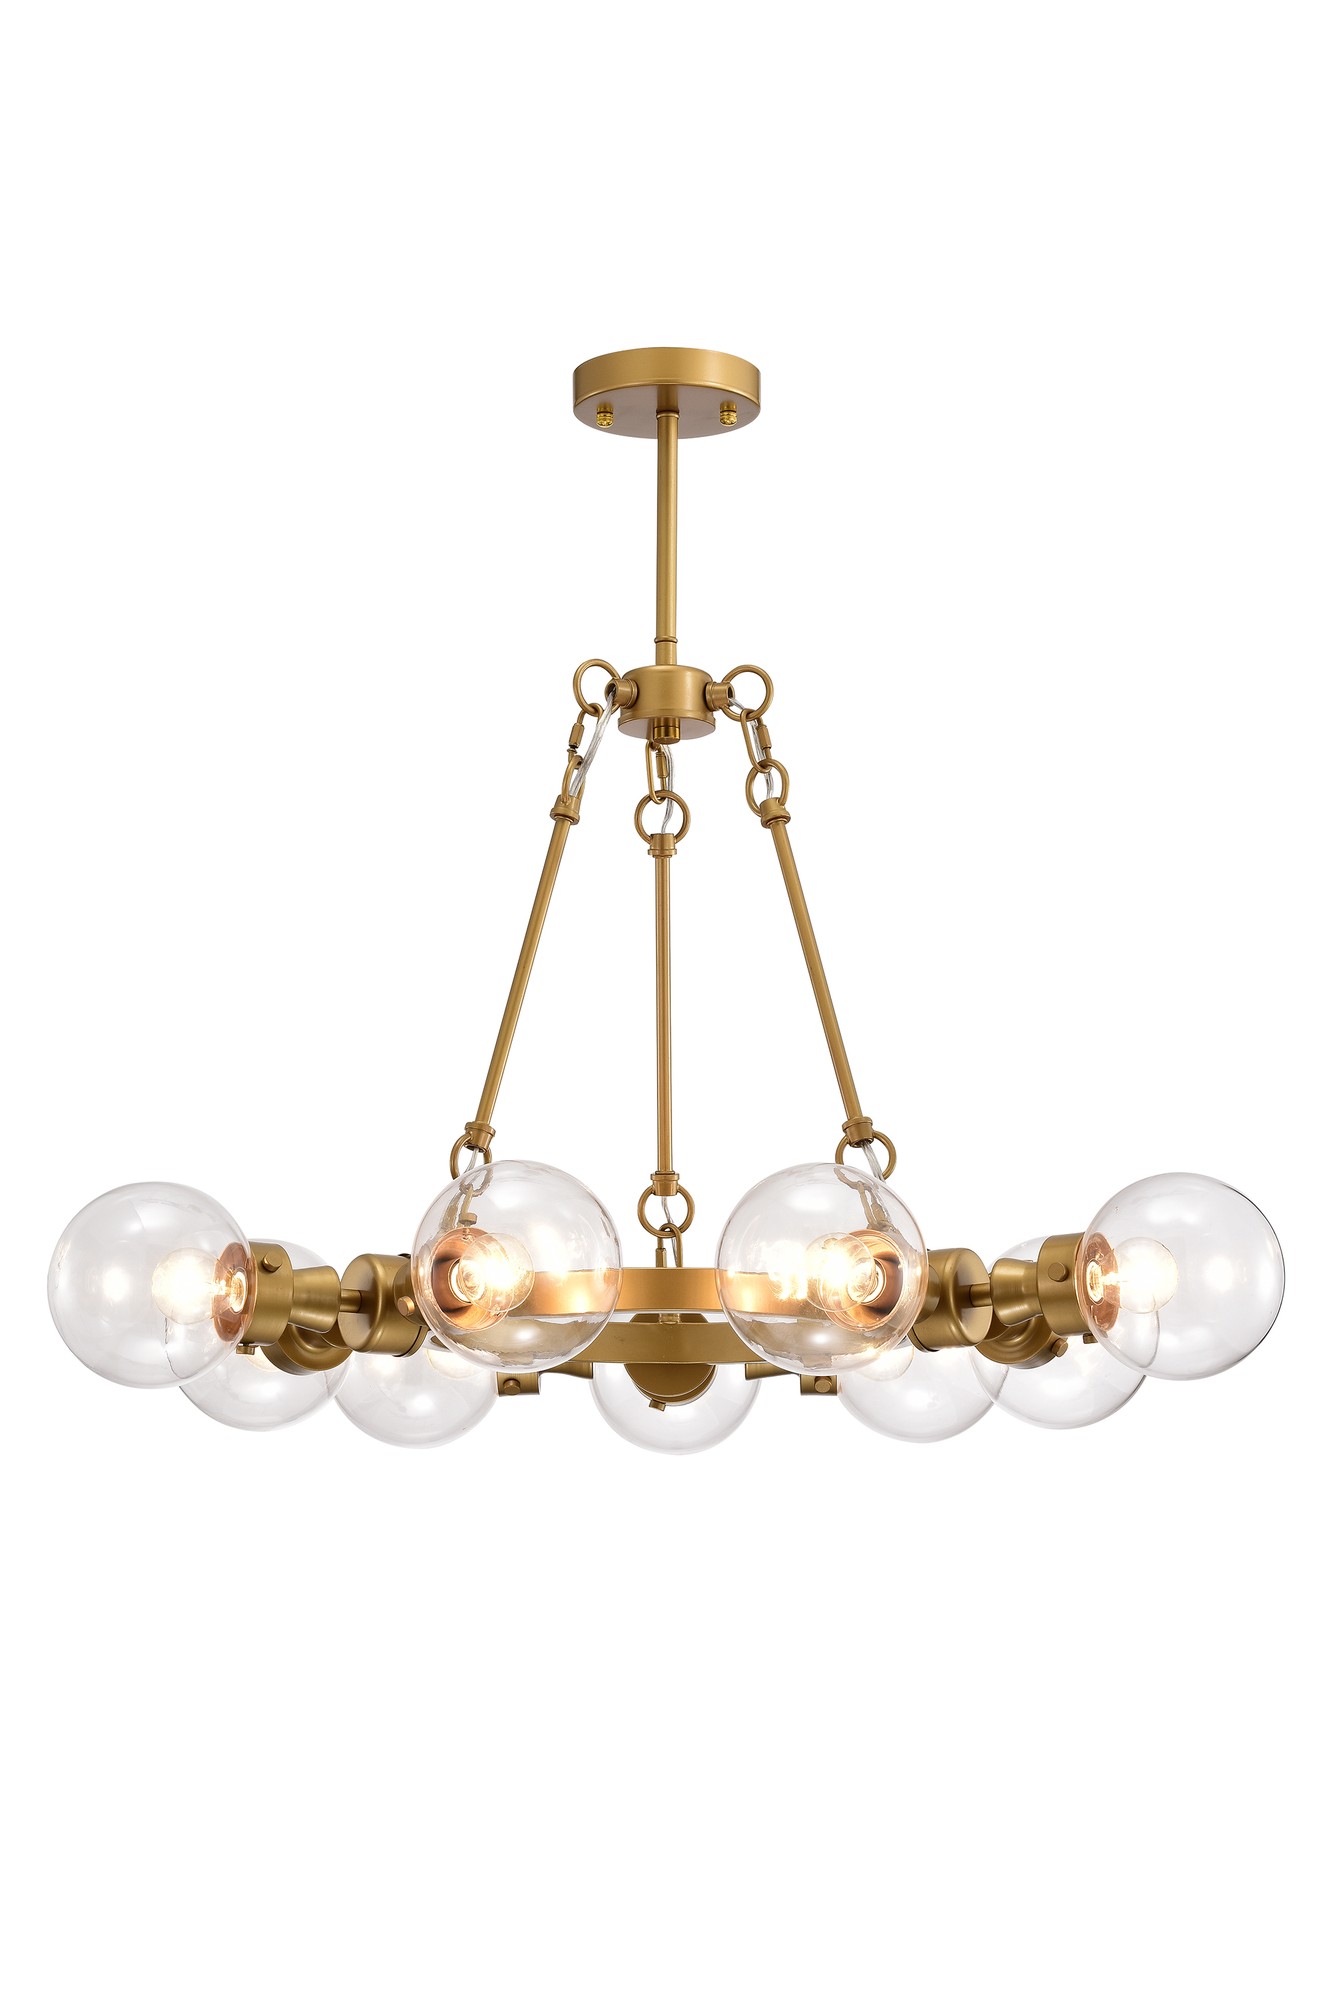 Chasen Matte Gold 9-Light 31-Inch Wagon Wheel Chandelier with Clear Glass Globe Shades